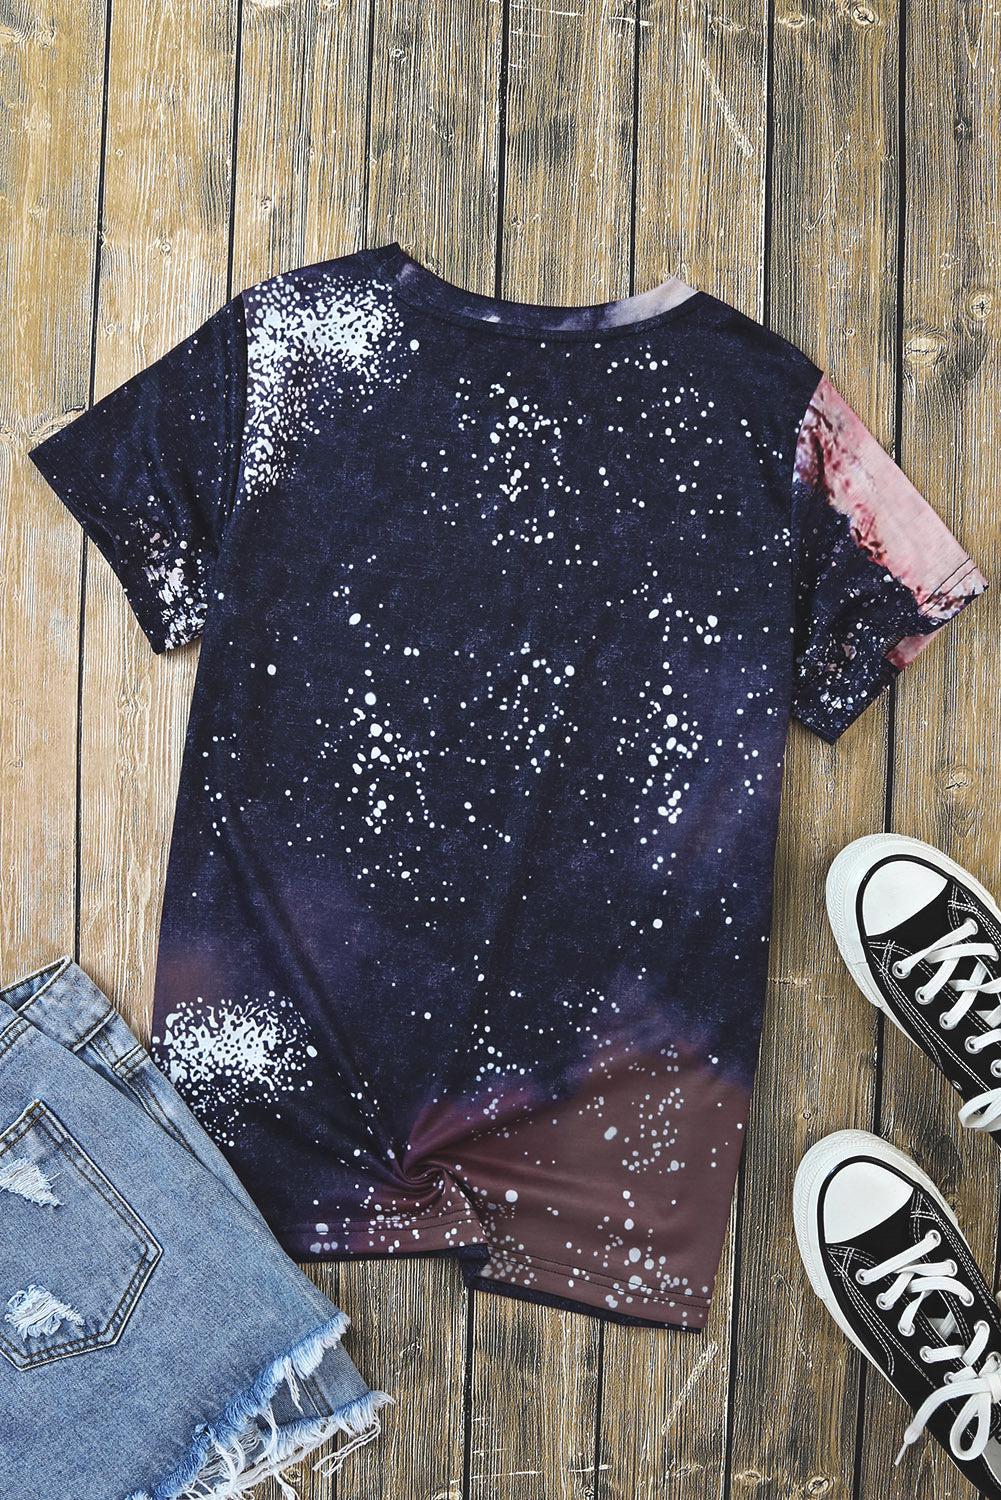 Printed AMERICA Graphic Round Neck Short Sleeve Tee BLUE ZONE PLANET